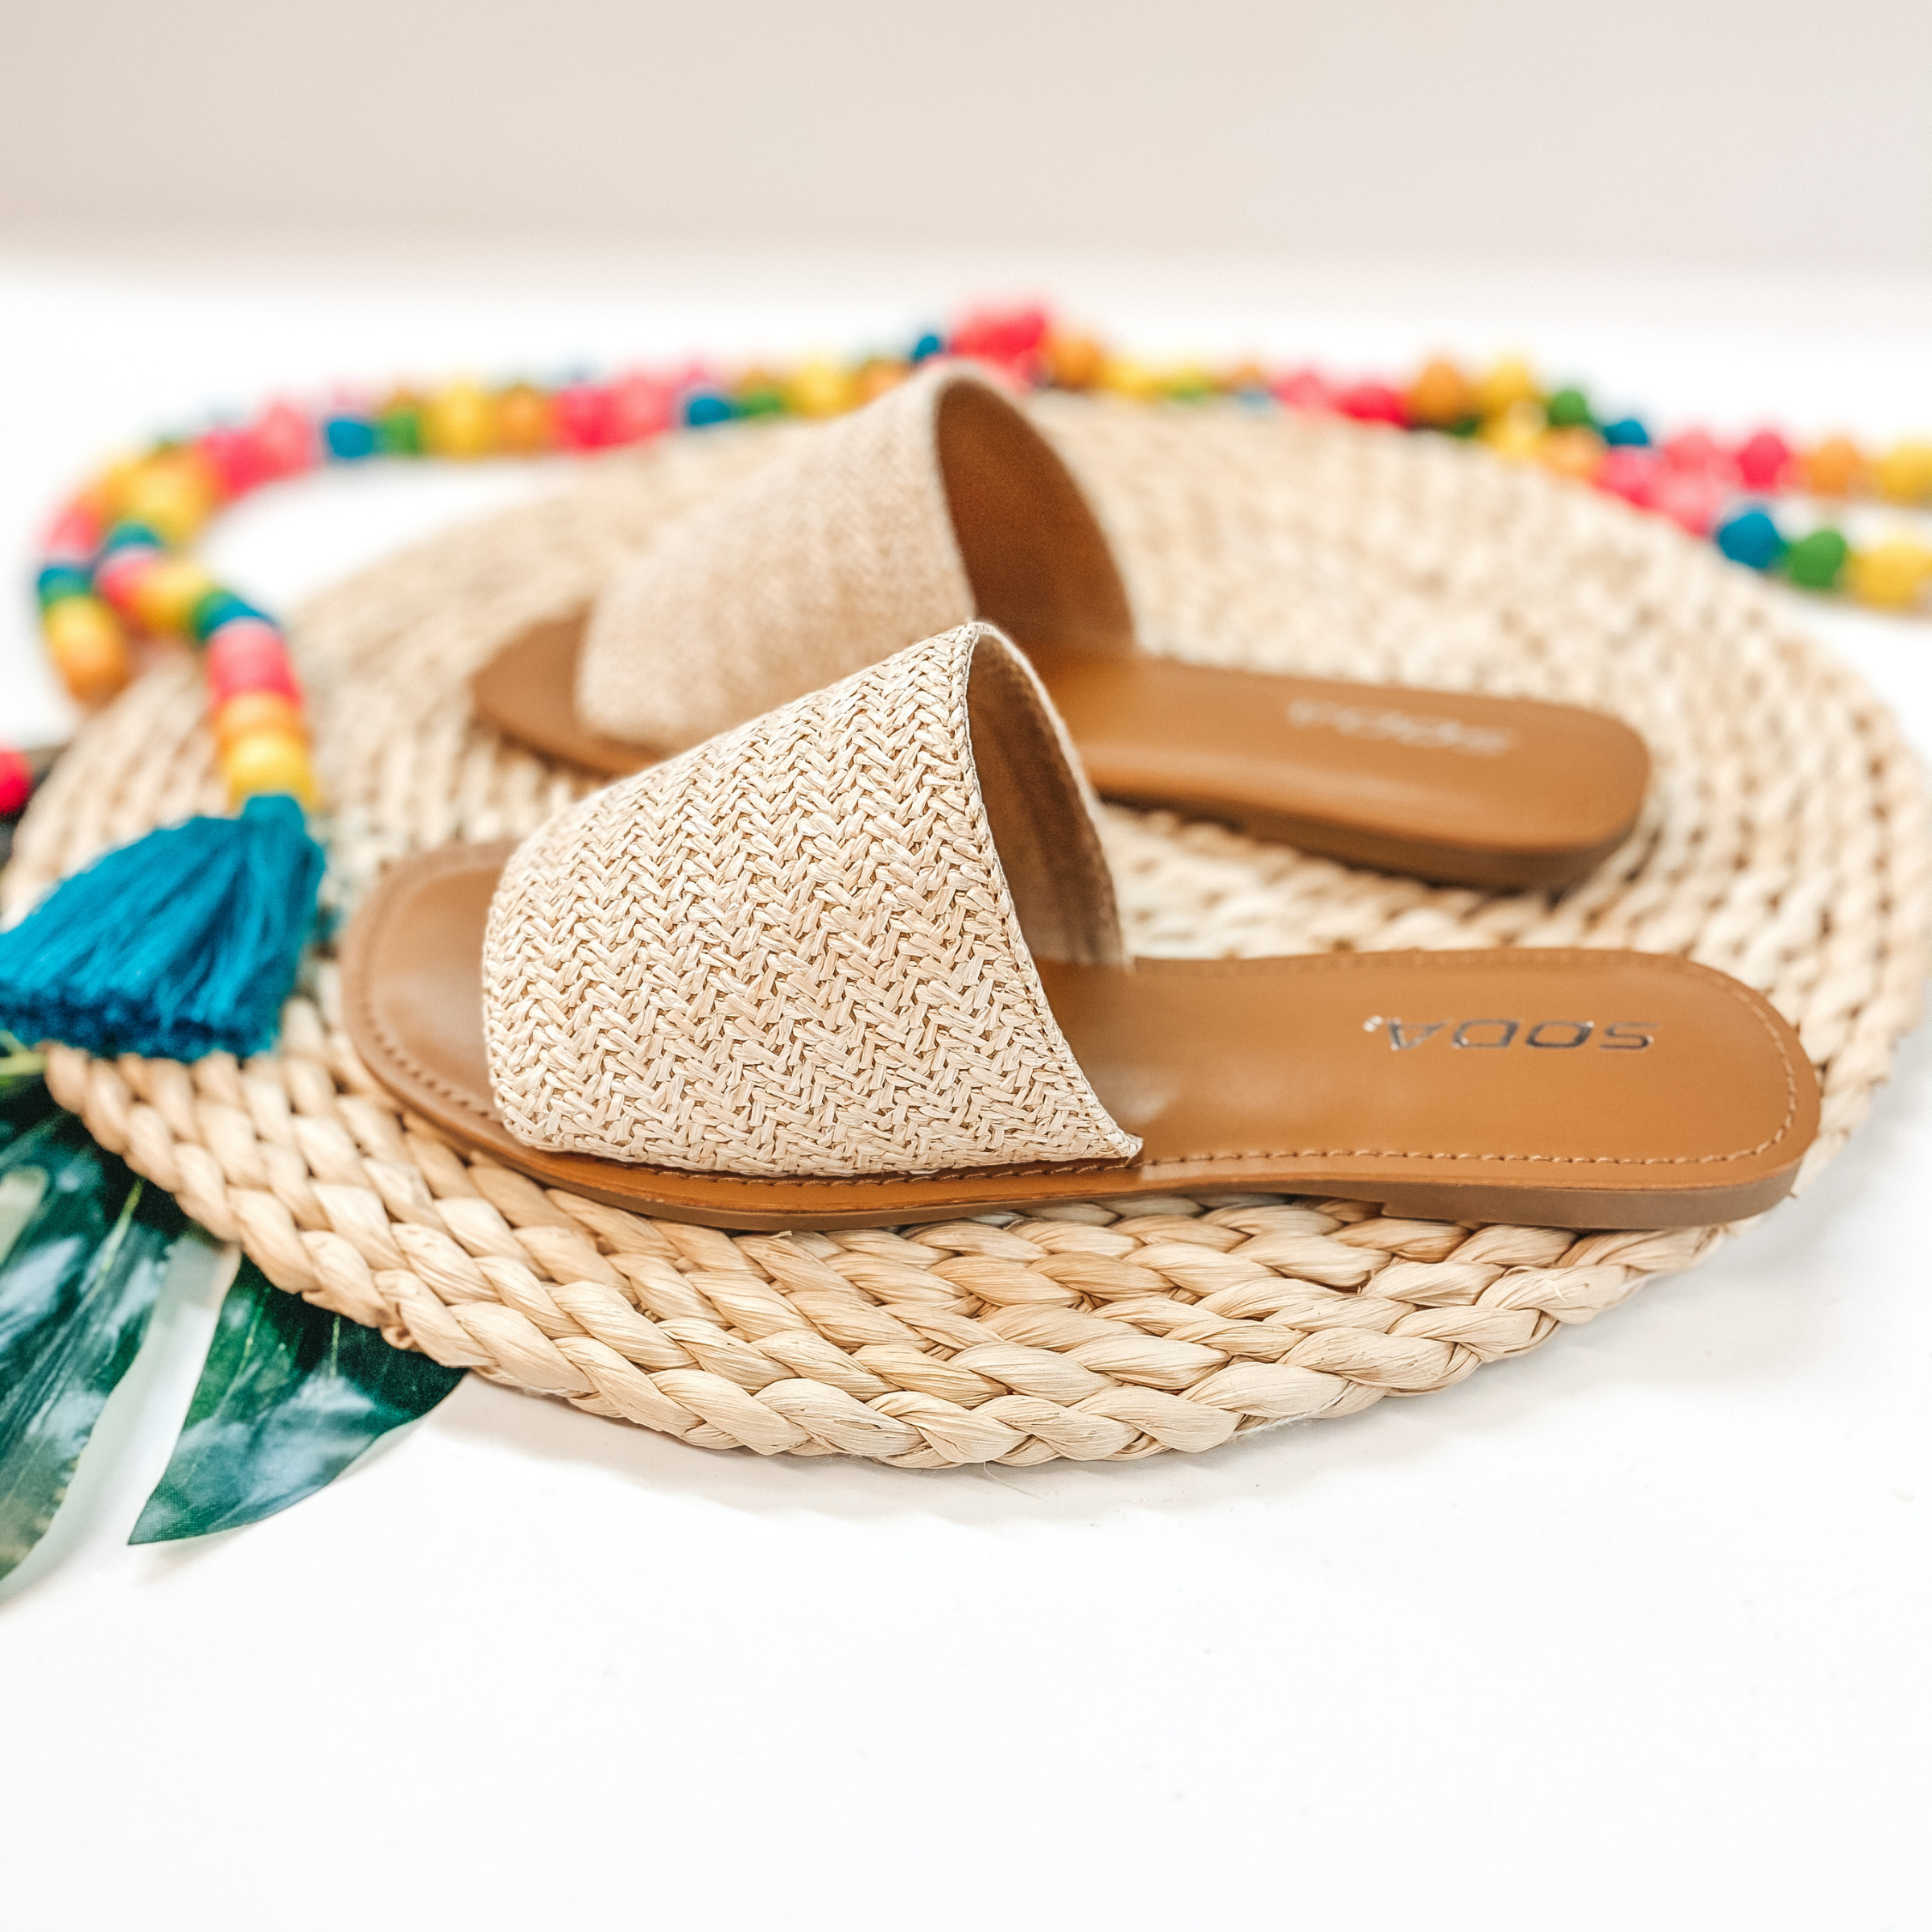 Palm Beach Stroll One Strap Woven Square Toe Slip On Sandals in Ivory - Giddy Up Glamour Boutique